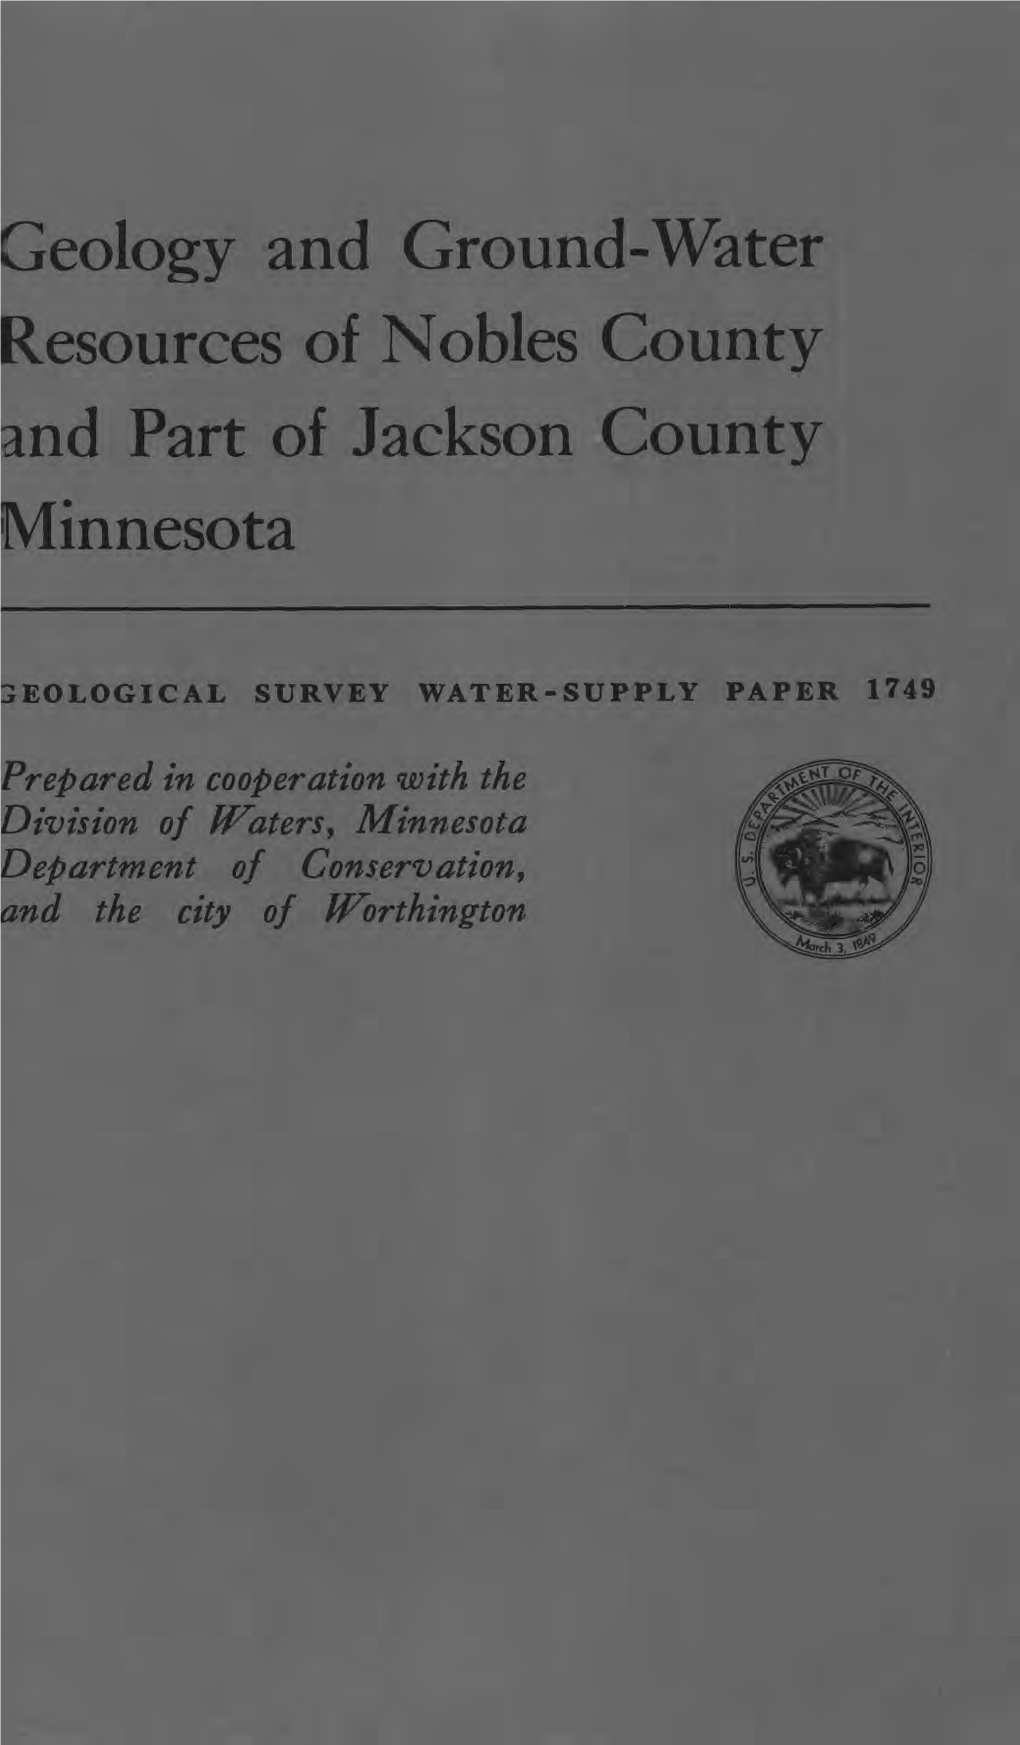 Geology and Ground-Water Resources of Nobles County and Part of Jackson County Minnesota